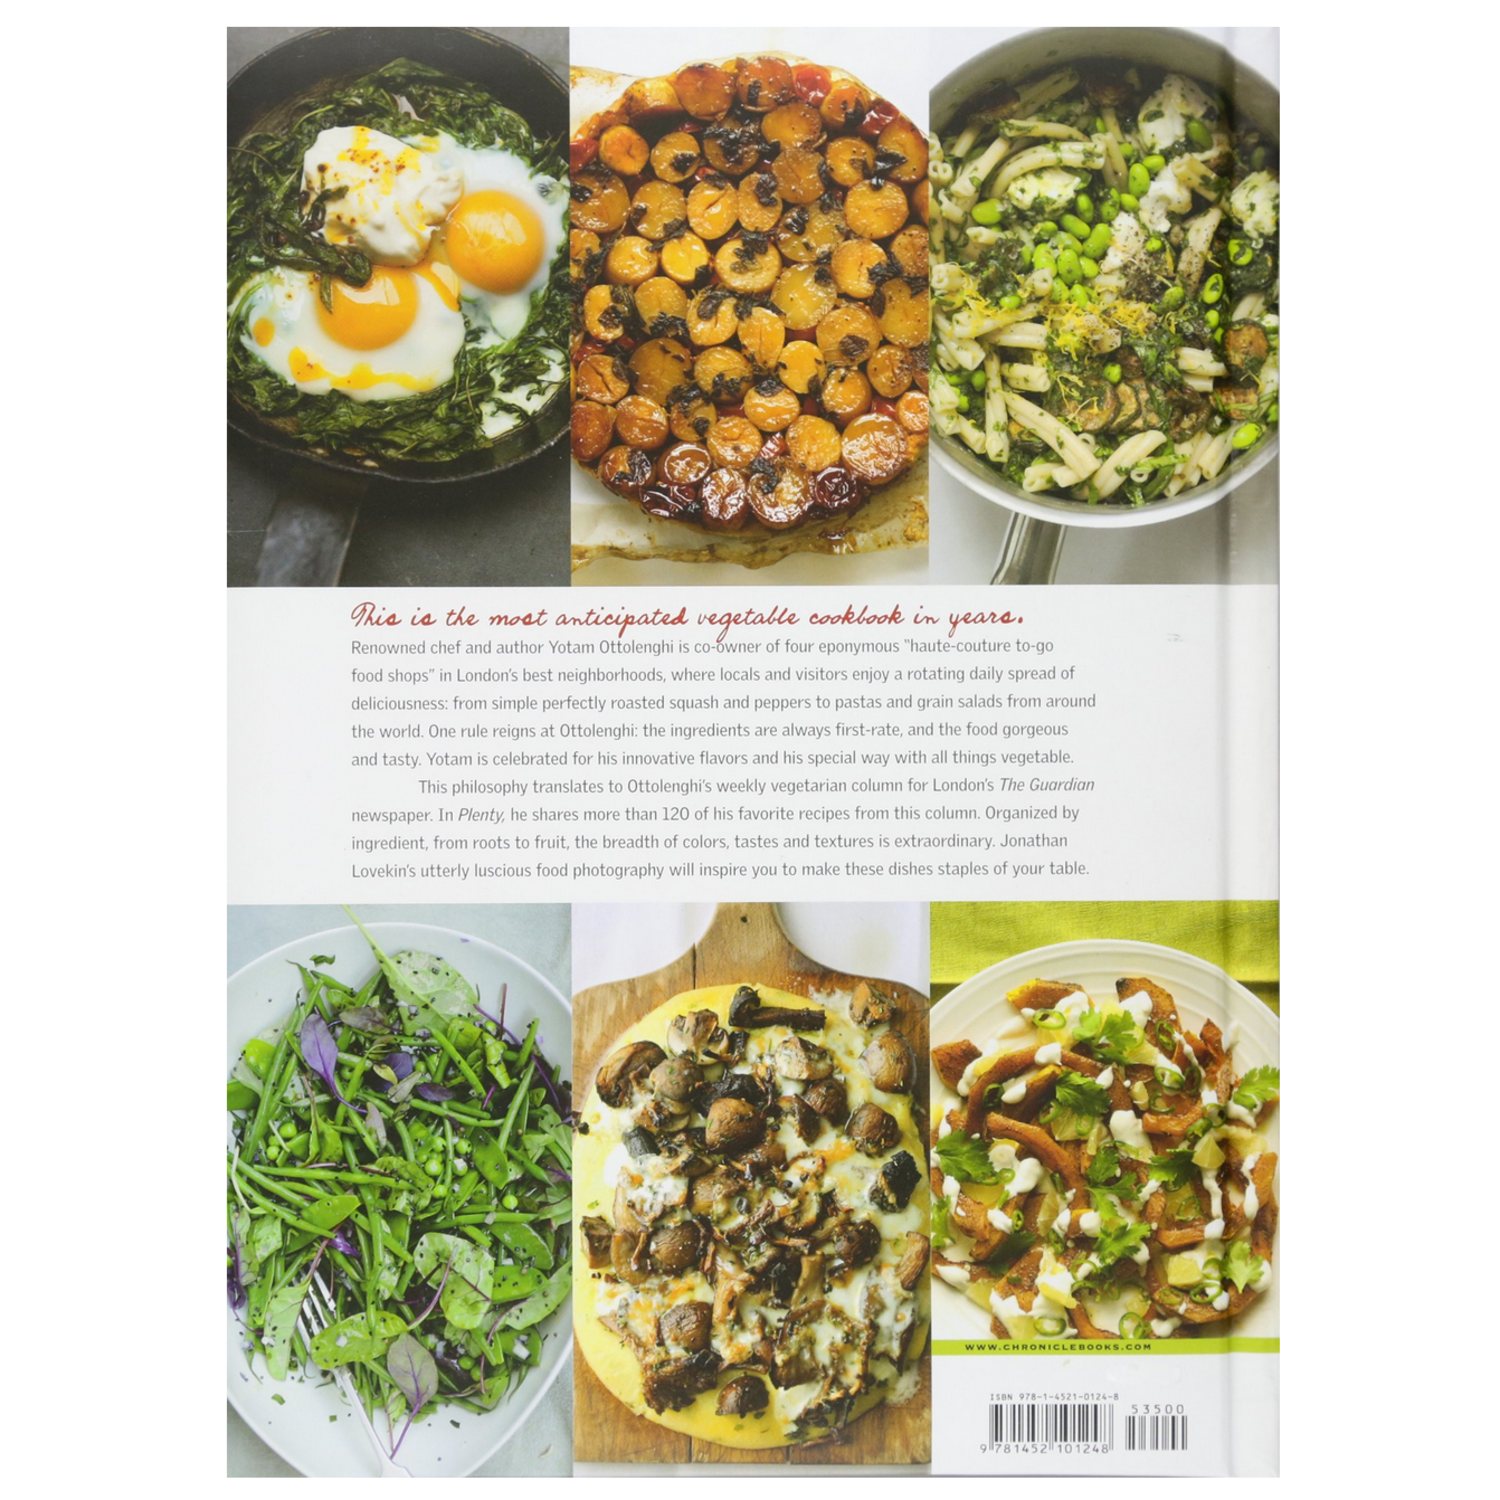 The Bookseller - Rights - Ebury serves up new cookbook from Yotam Ottolenghi  as rights snapped up around the world